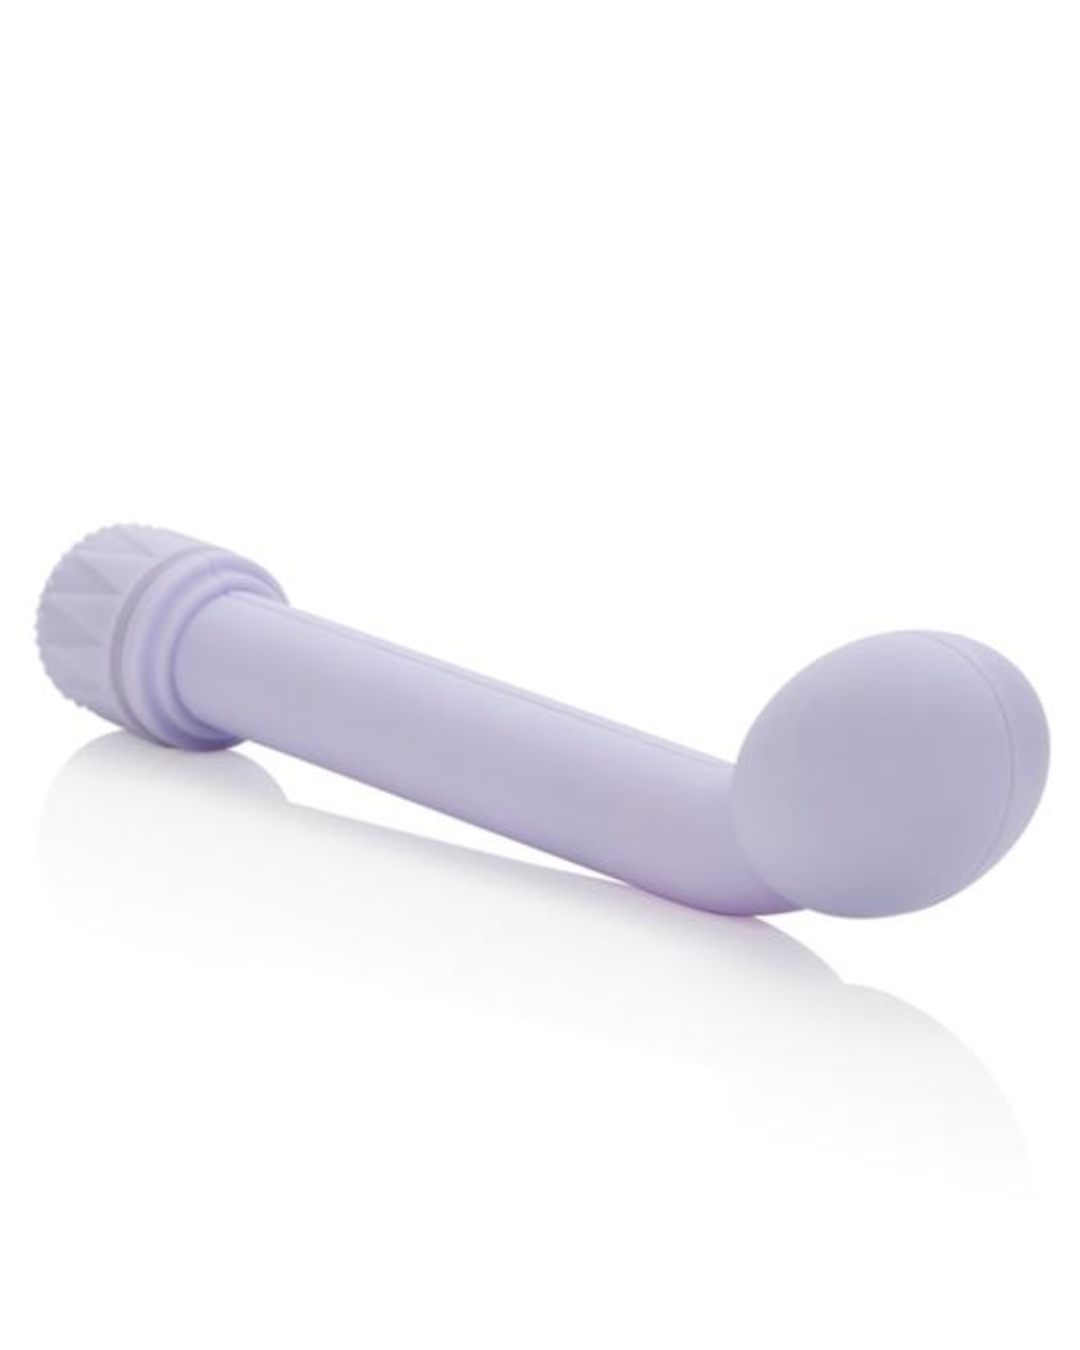 First Time G-Spot Tulip Vibrator by Cal Exotics - Assorted Colors purple with view of the tip